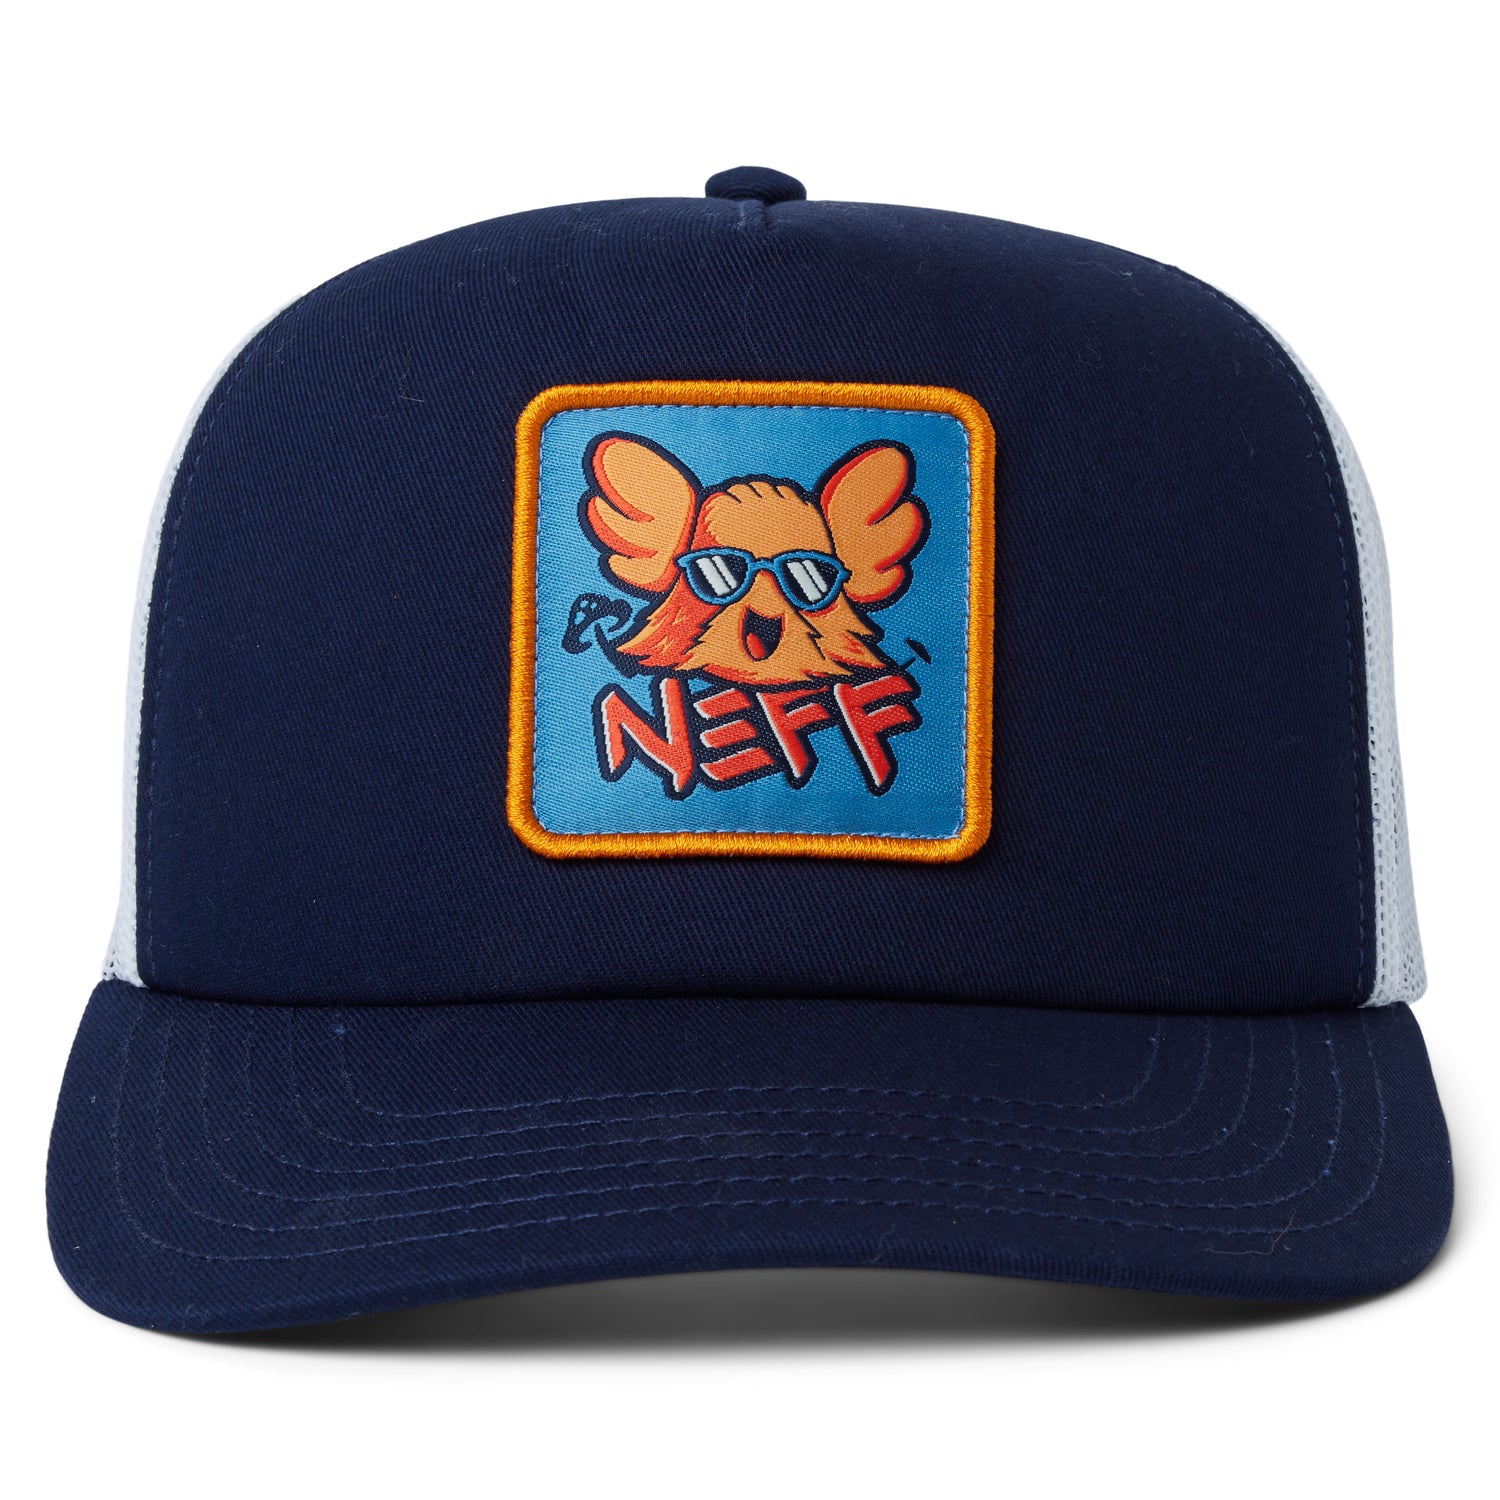 FORTNITE ICON CHARACTERS TRUCKER HAT - NAVY